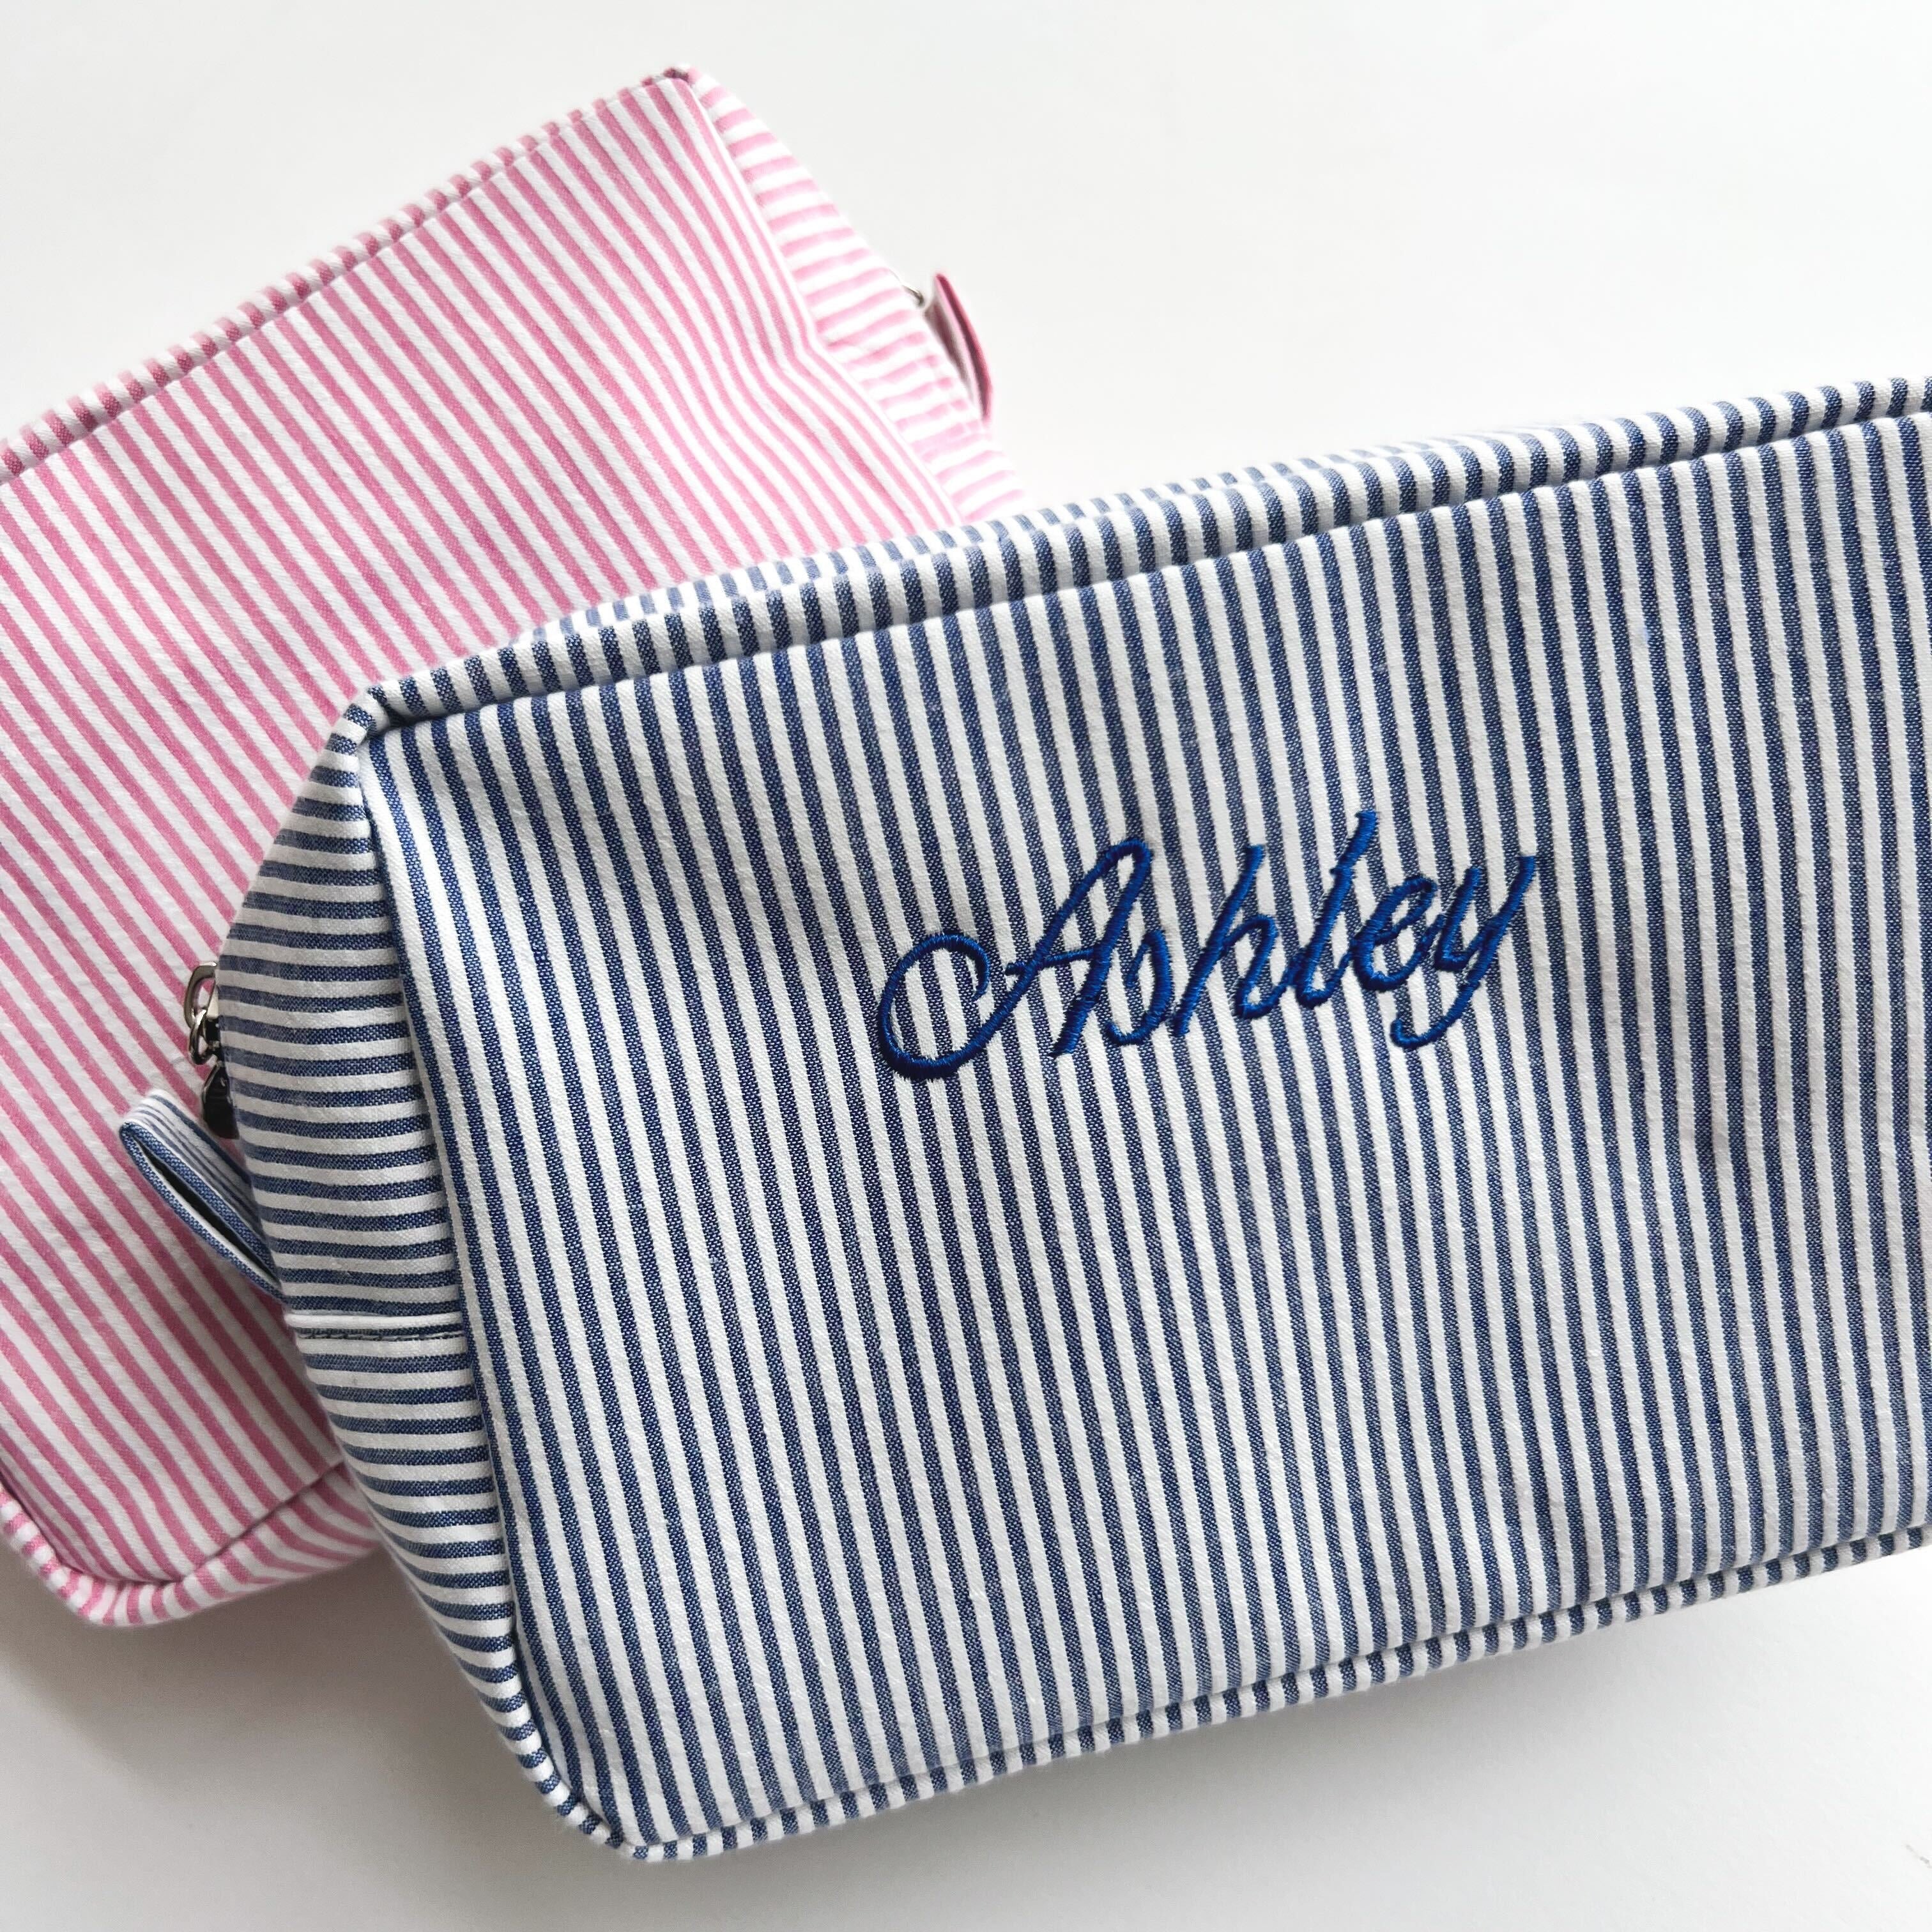 Navy Striped Makeup Bag on top of the pink striped bag